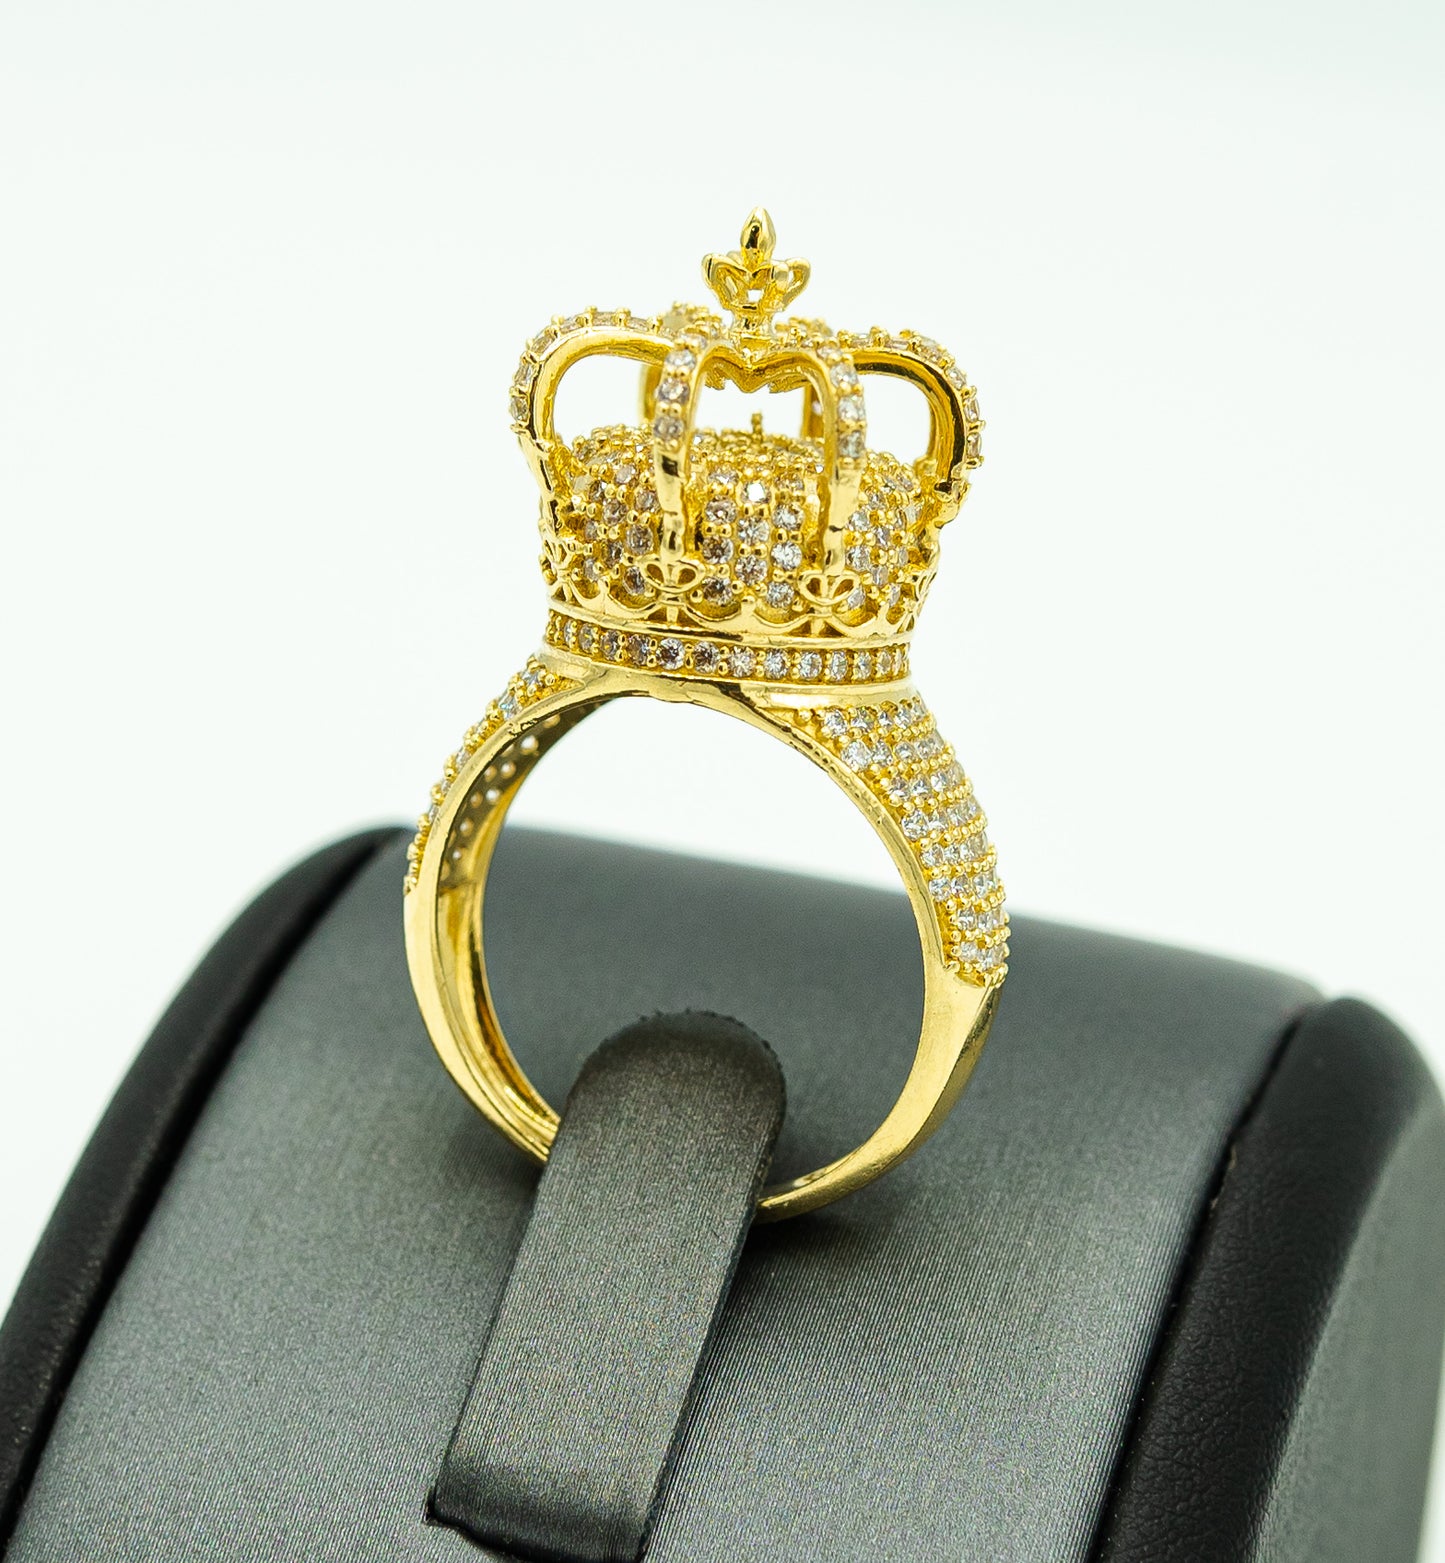 14k crown ring by GDO